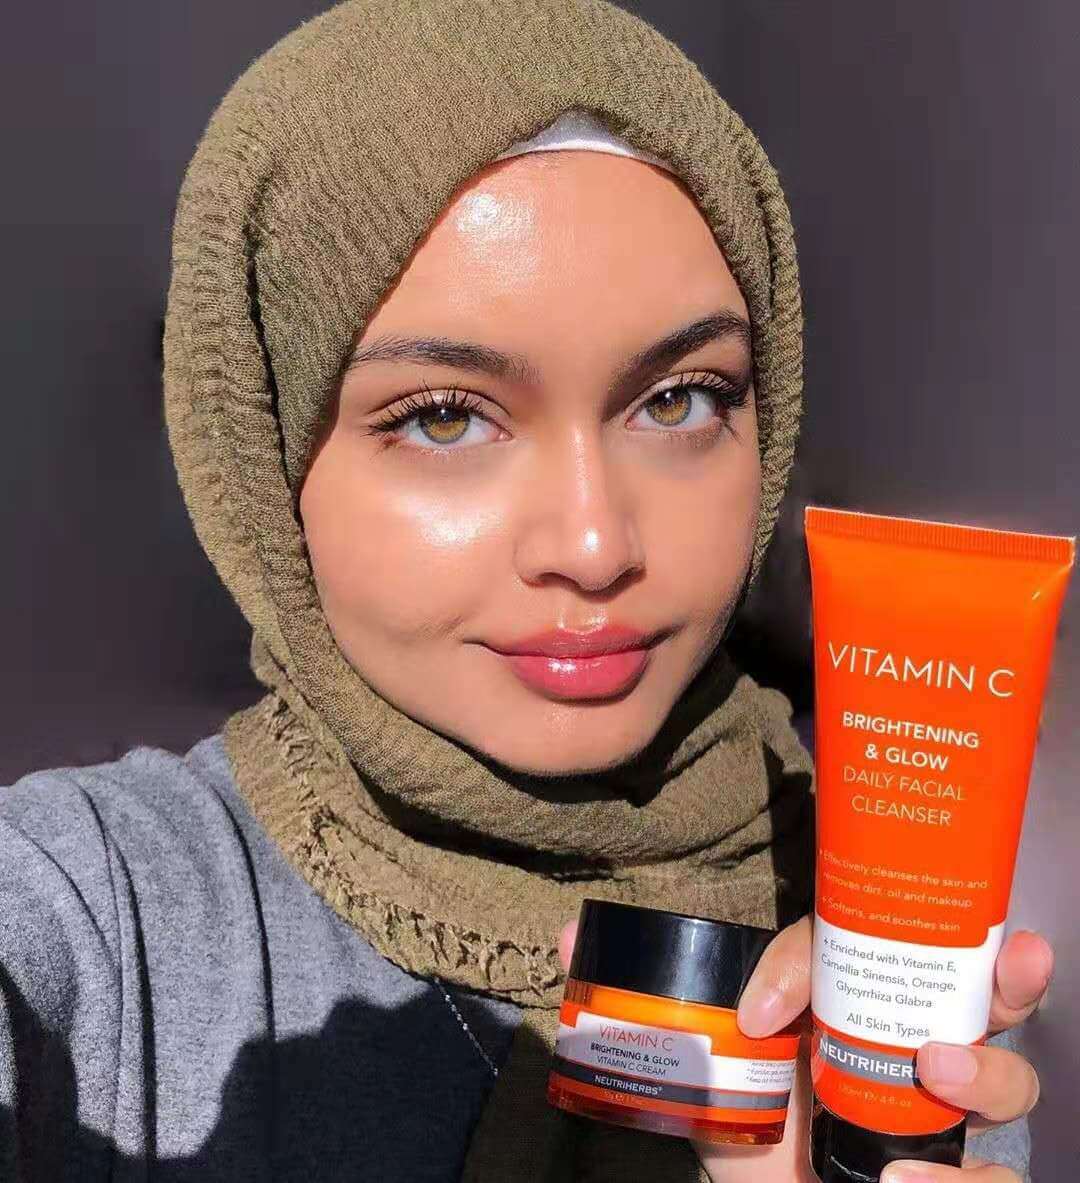 Neutriherbs vitamin c skincare routine for dull, tired &amp; irritated skin-Instagram influencers recommend 